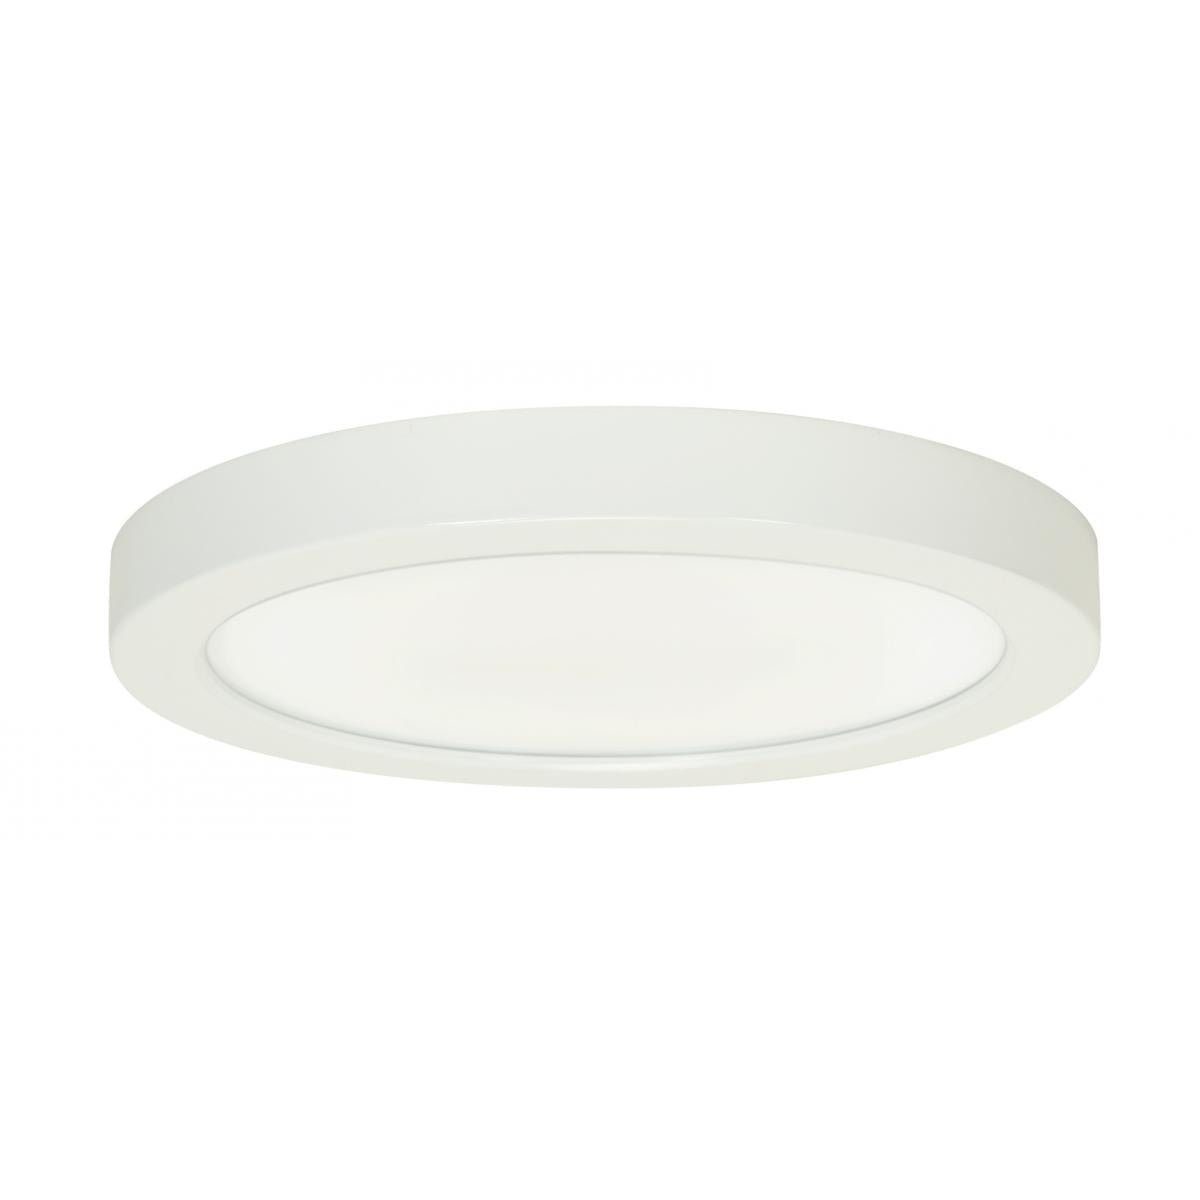 SATCO-S29336SATCO S29336 18W 9" Round LED Surface Mount 27K/30K